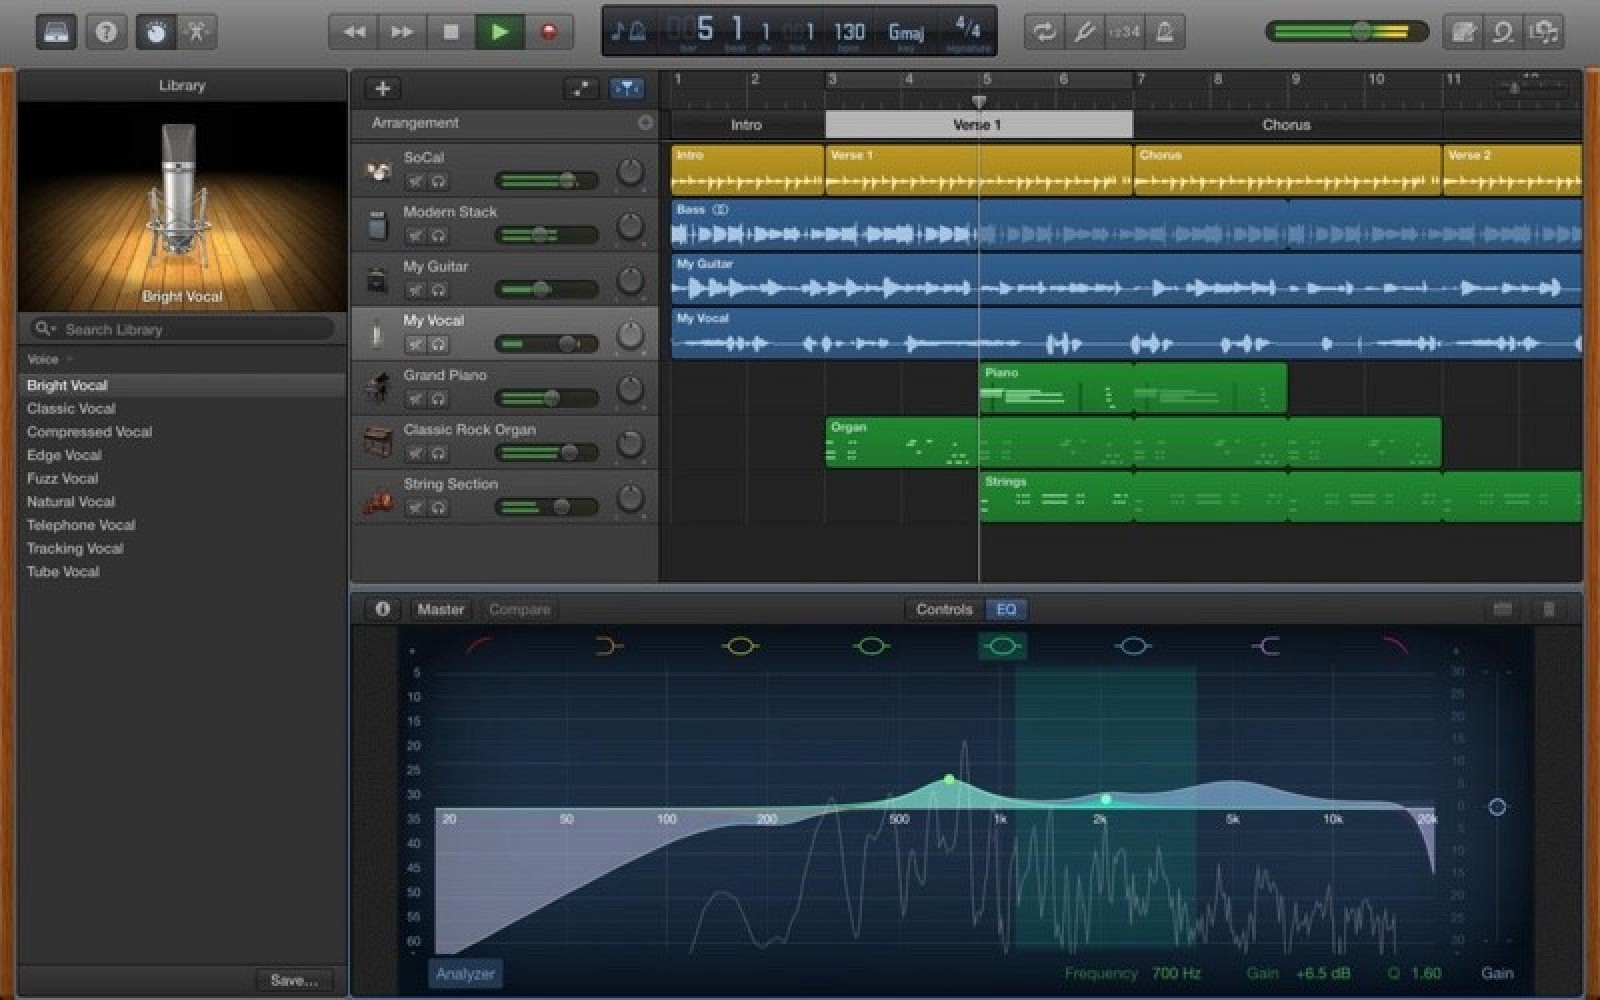 What Is The Latest Version Of Garageband For Mac